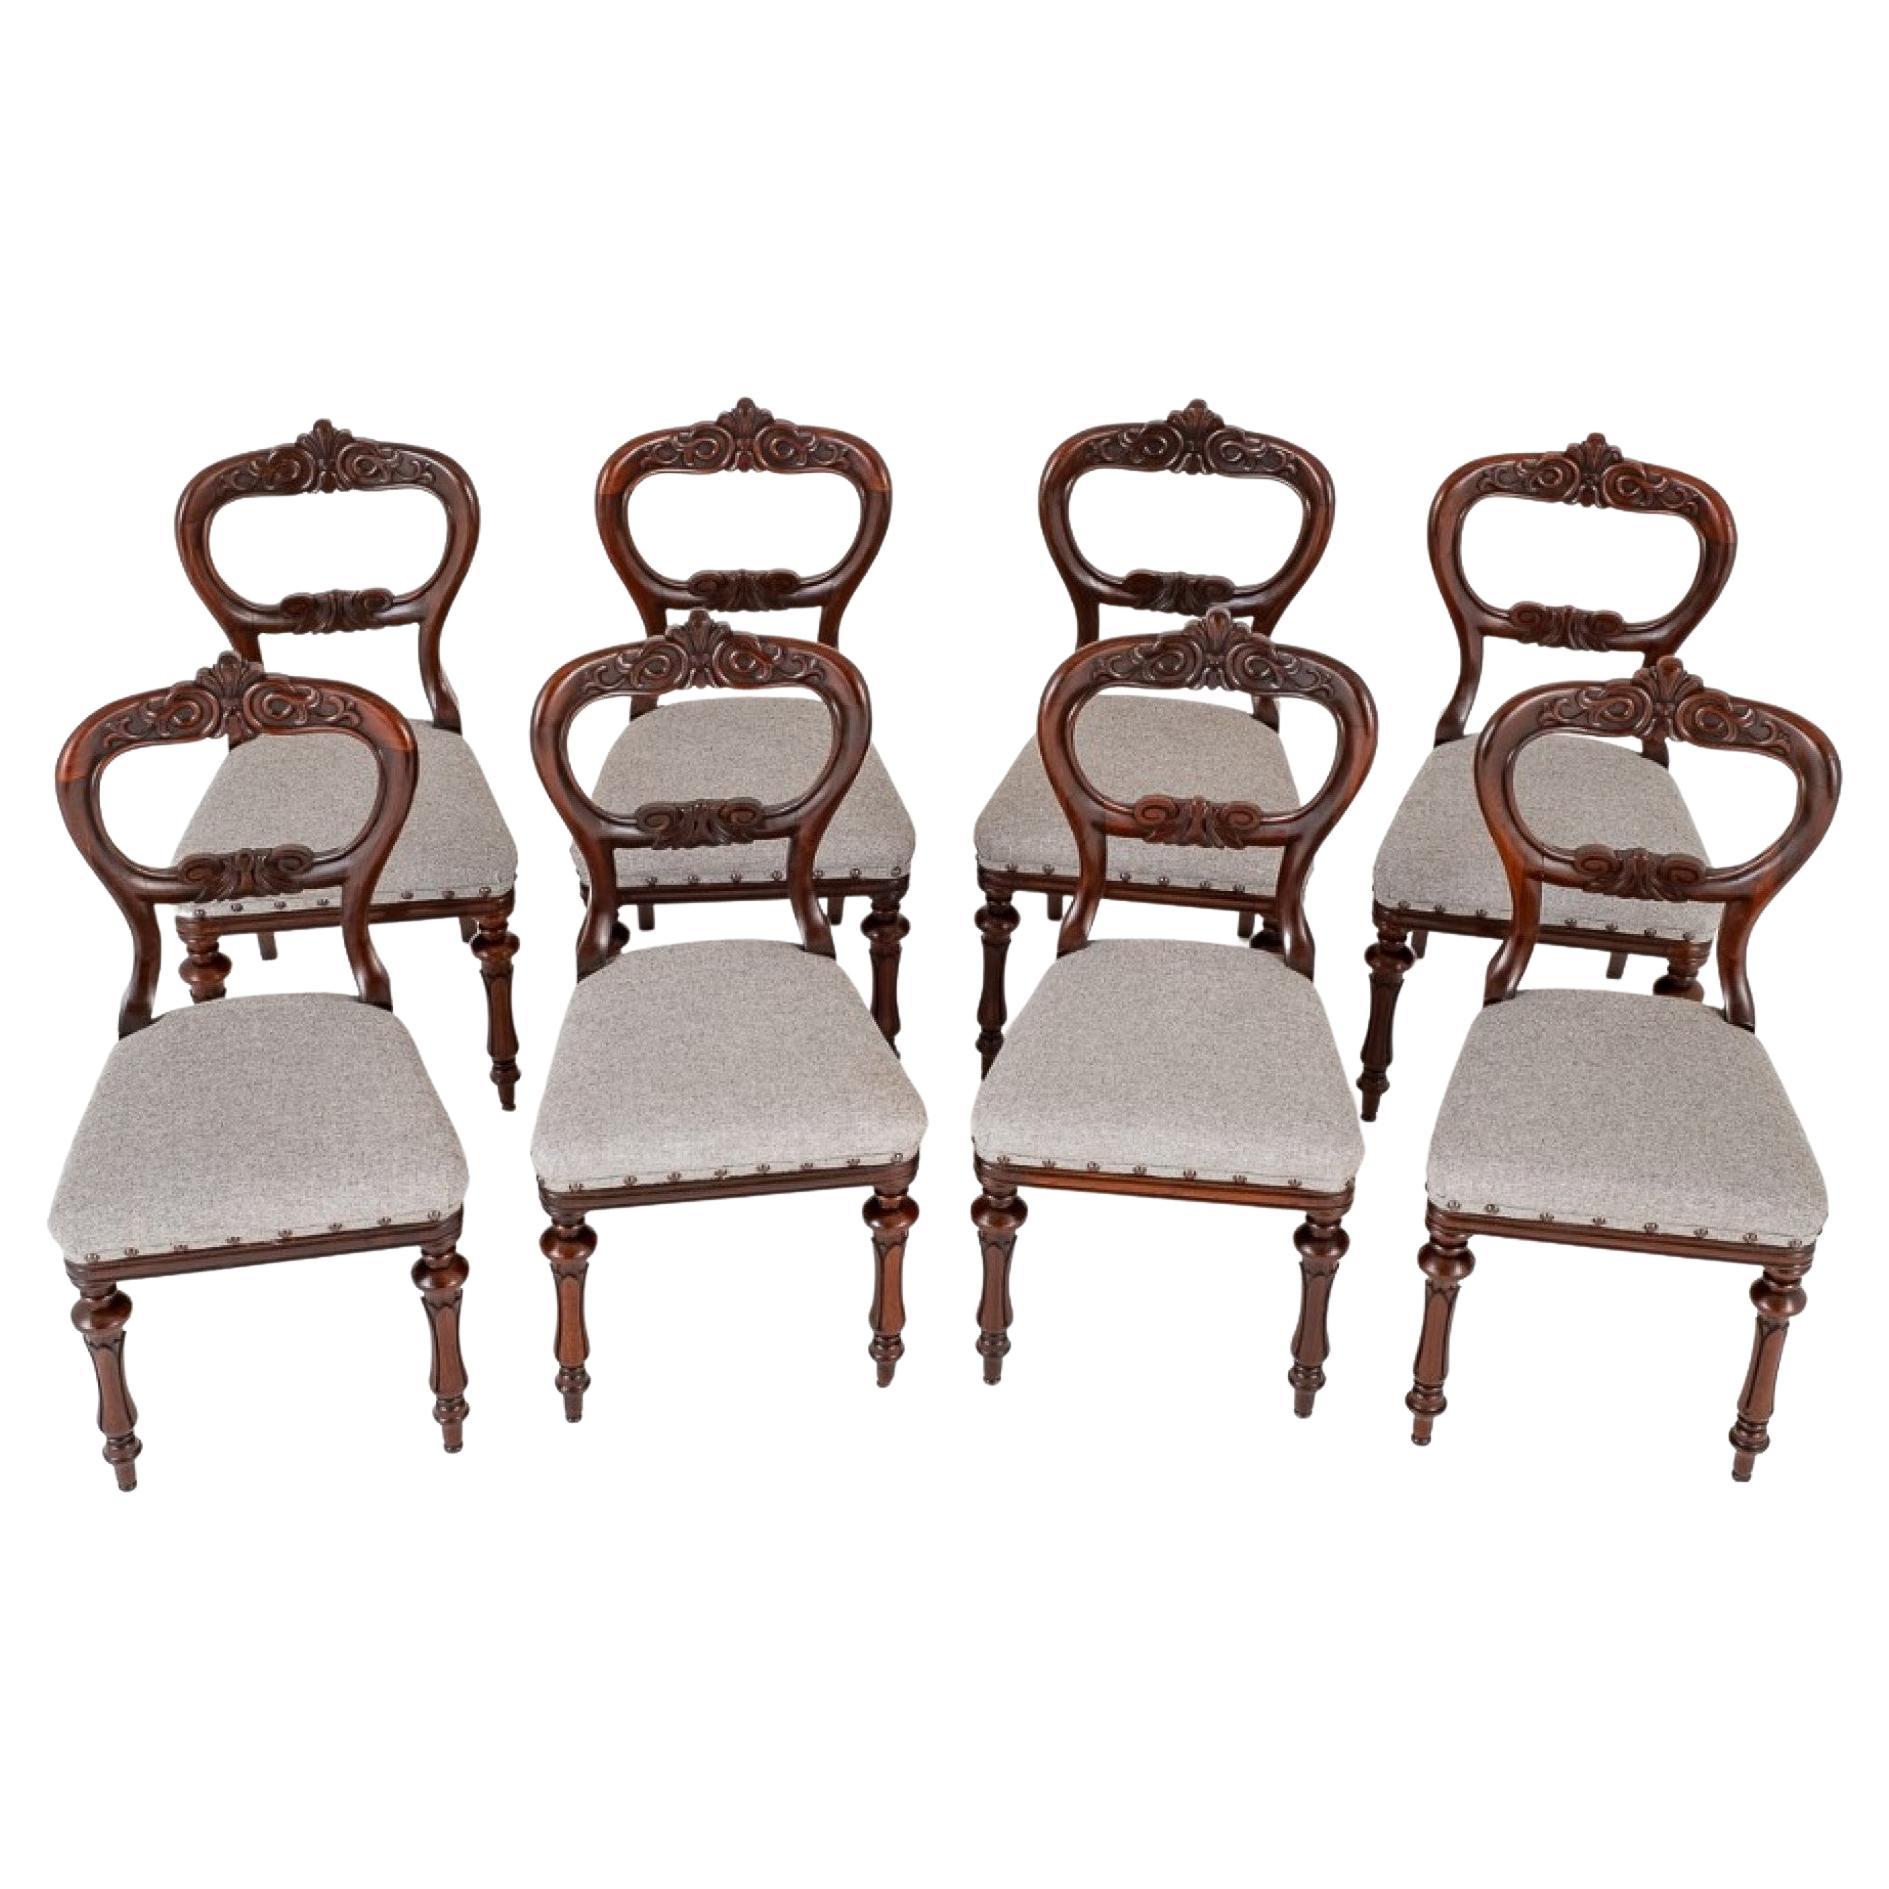 William IV Dining Chairs 19th Century Furniture